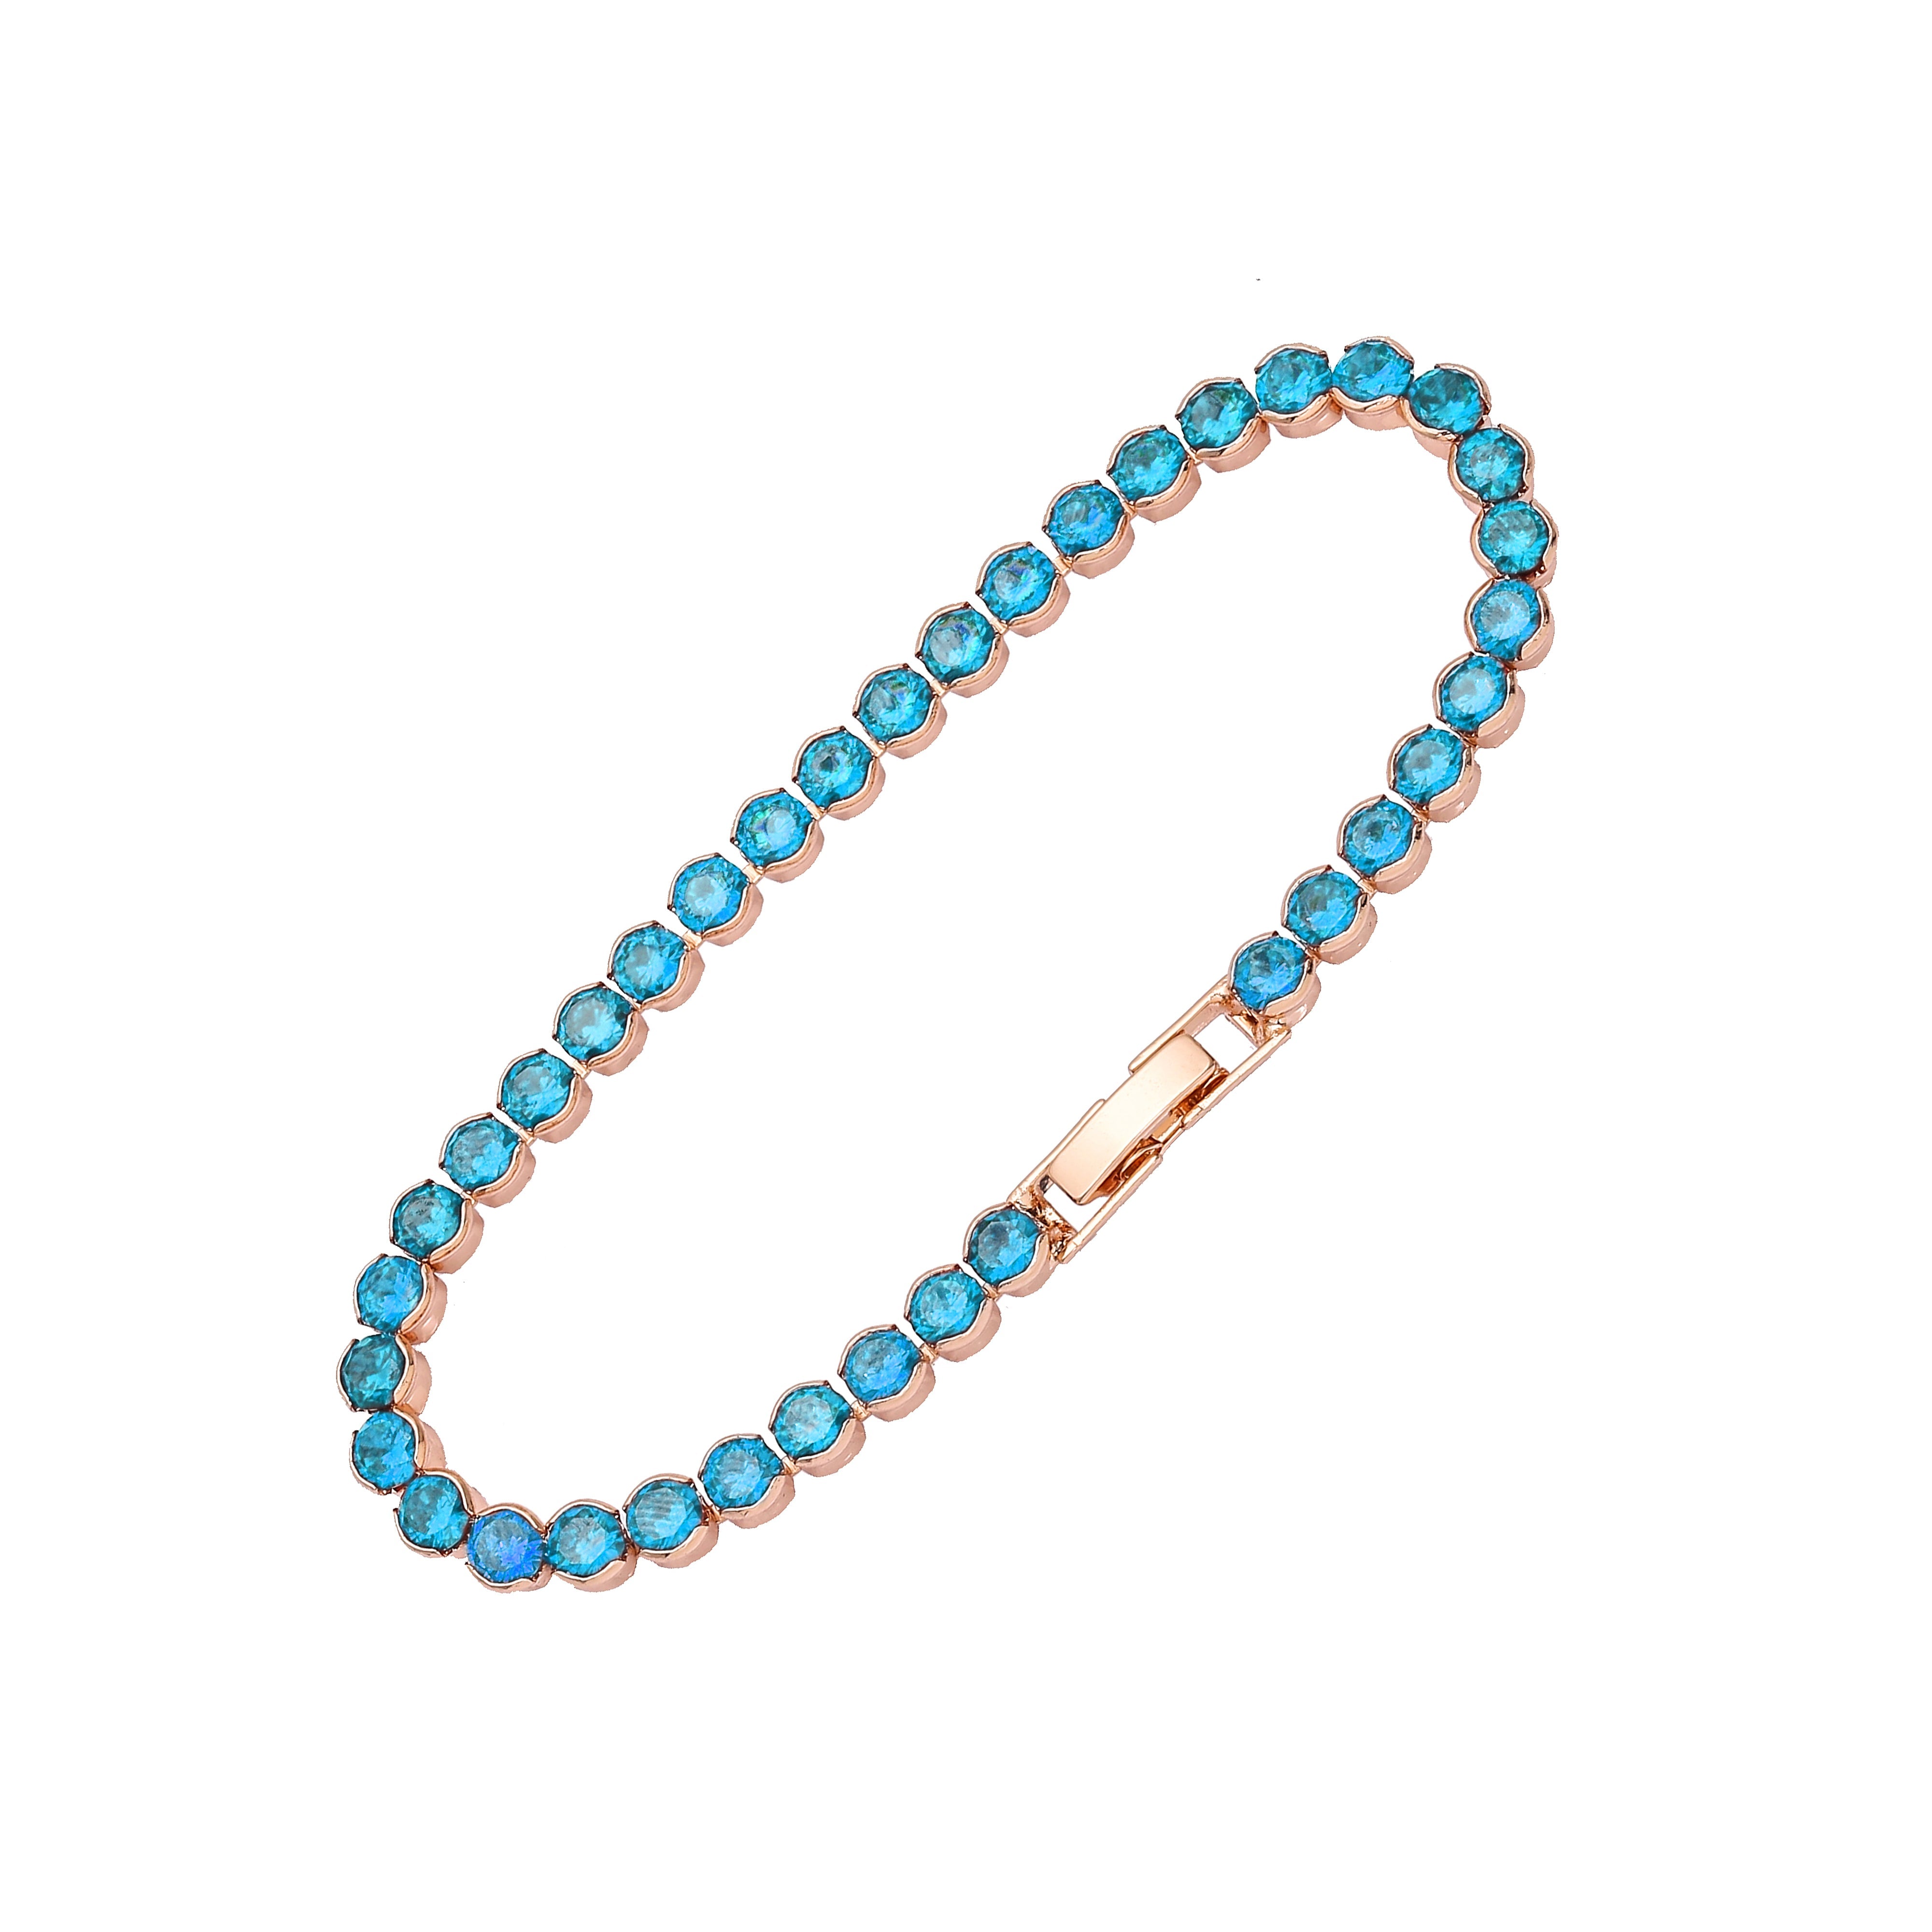 Cluster deluxe Tennis bracelets plated in 14K Gold, Rose Gold colors